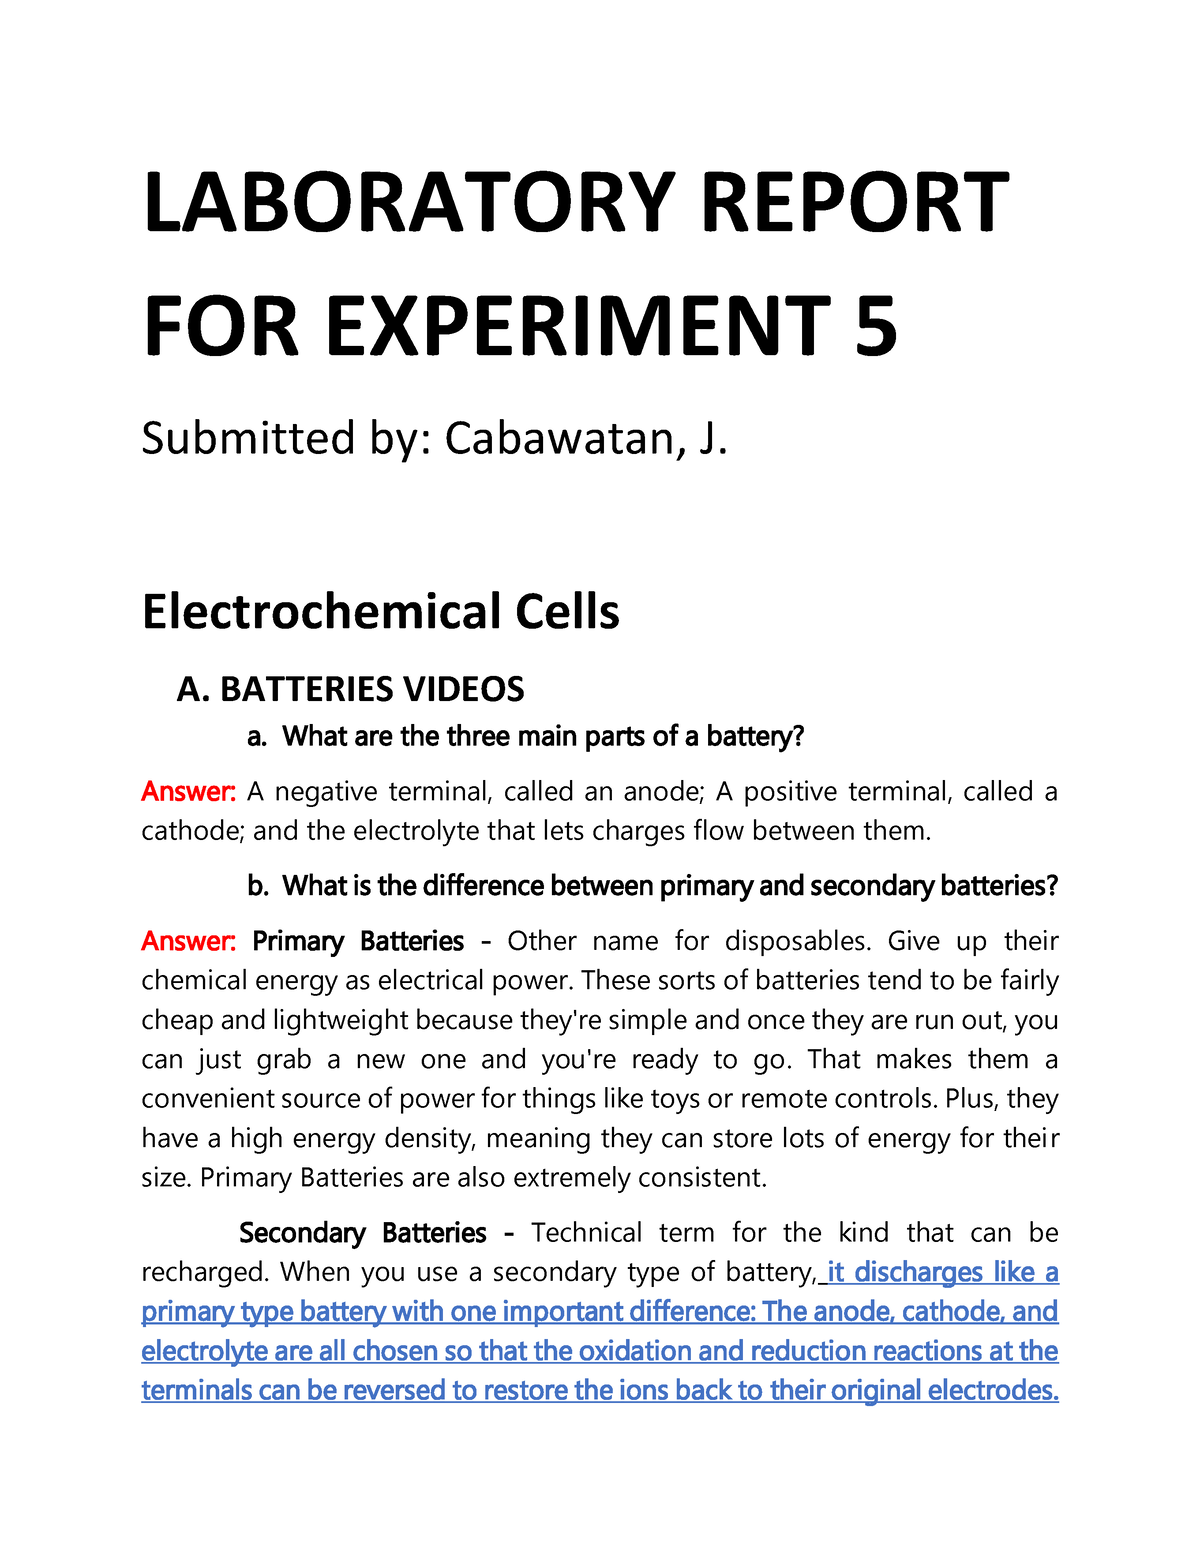 Electrochemical Cells Experiment Lab Report with answers and solutions ...